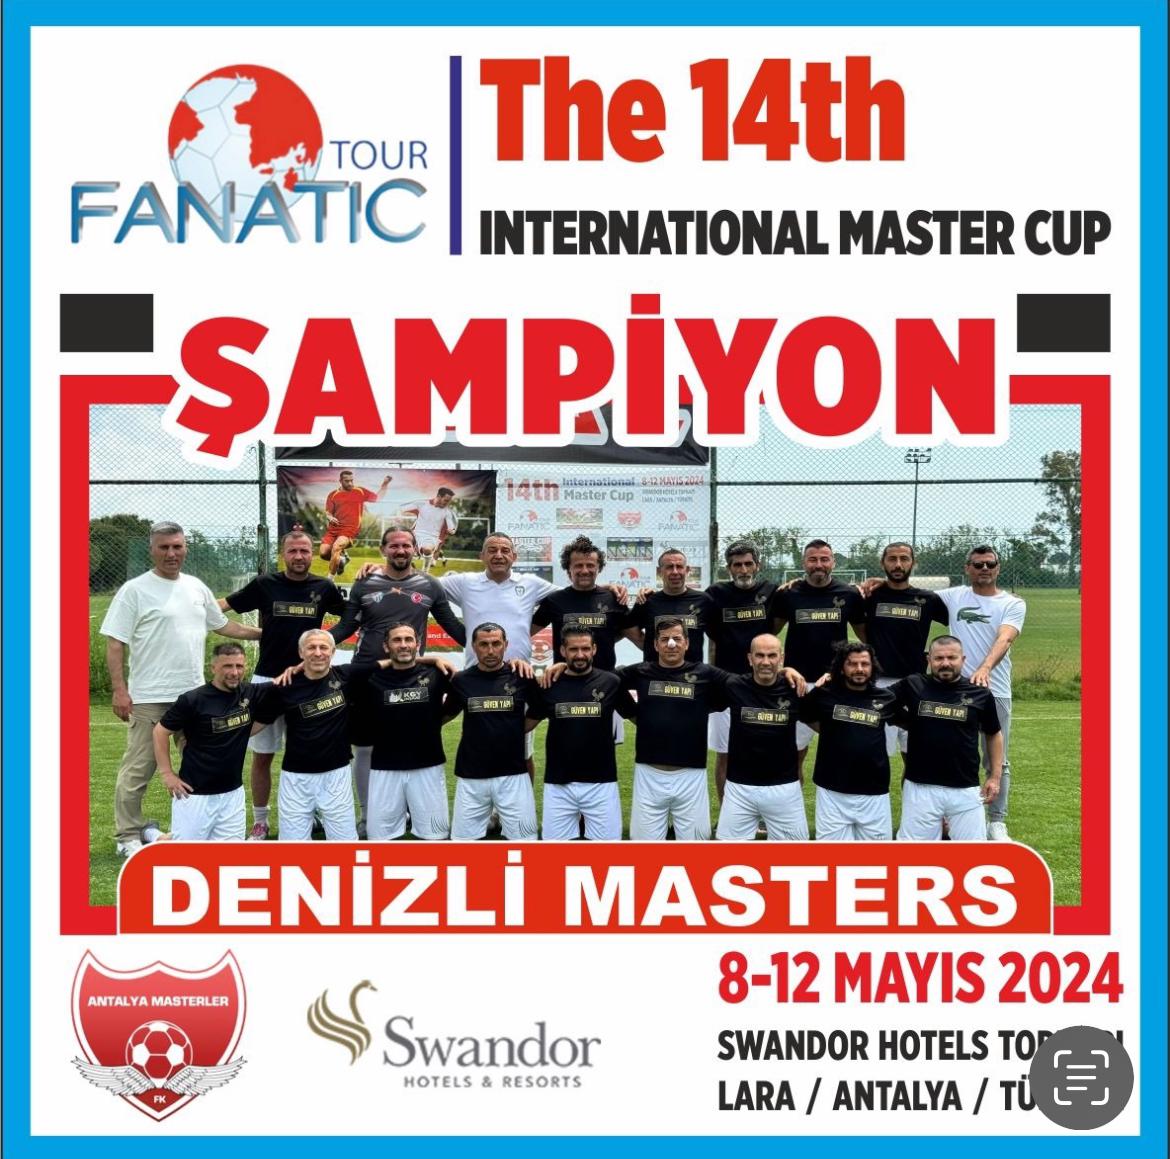 DENİZLİ MASTERS ARE CHAMPIONS IN THE 14th INTERNATIONAL MASTERS CUP